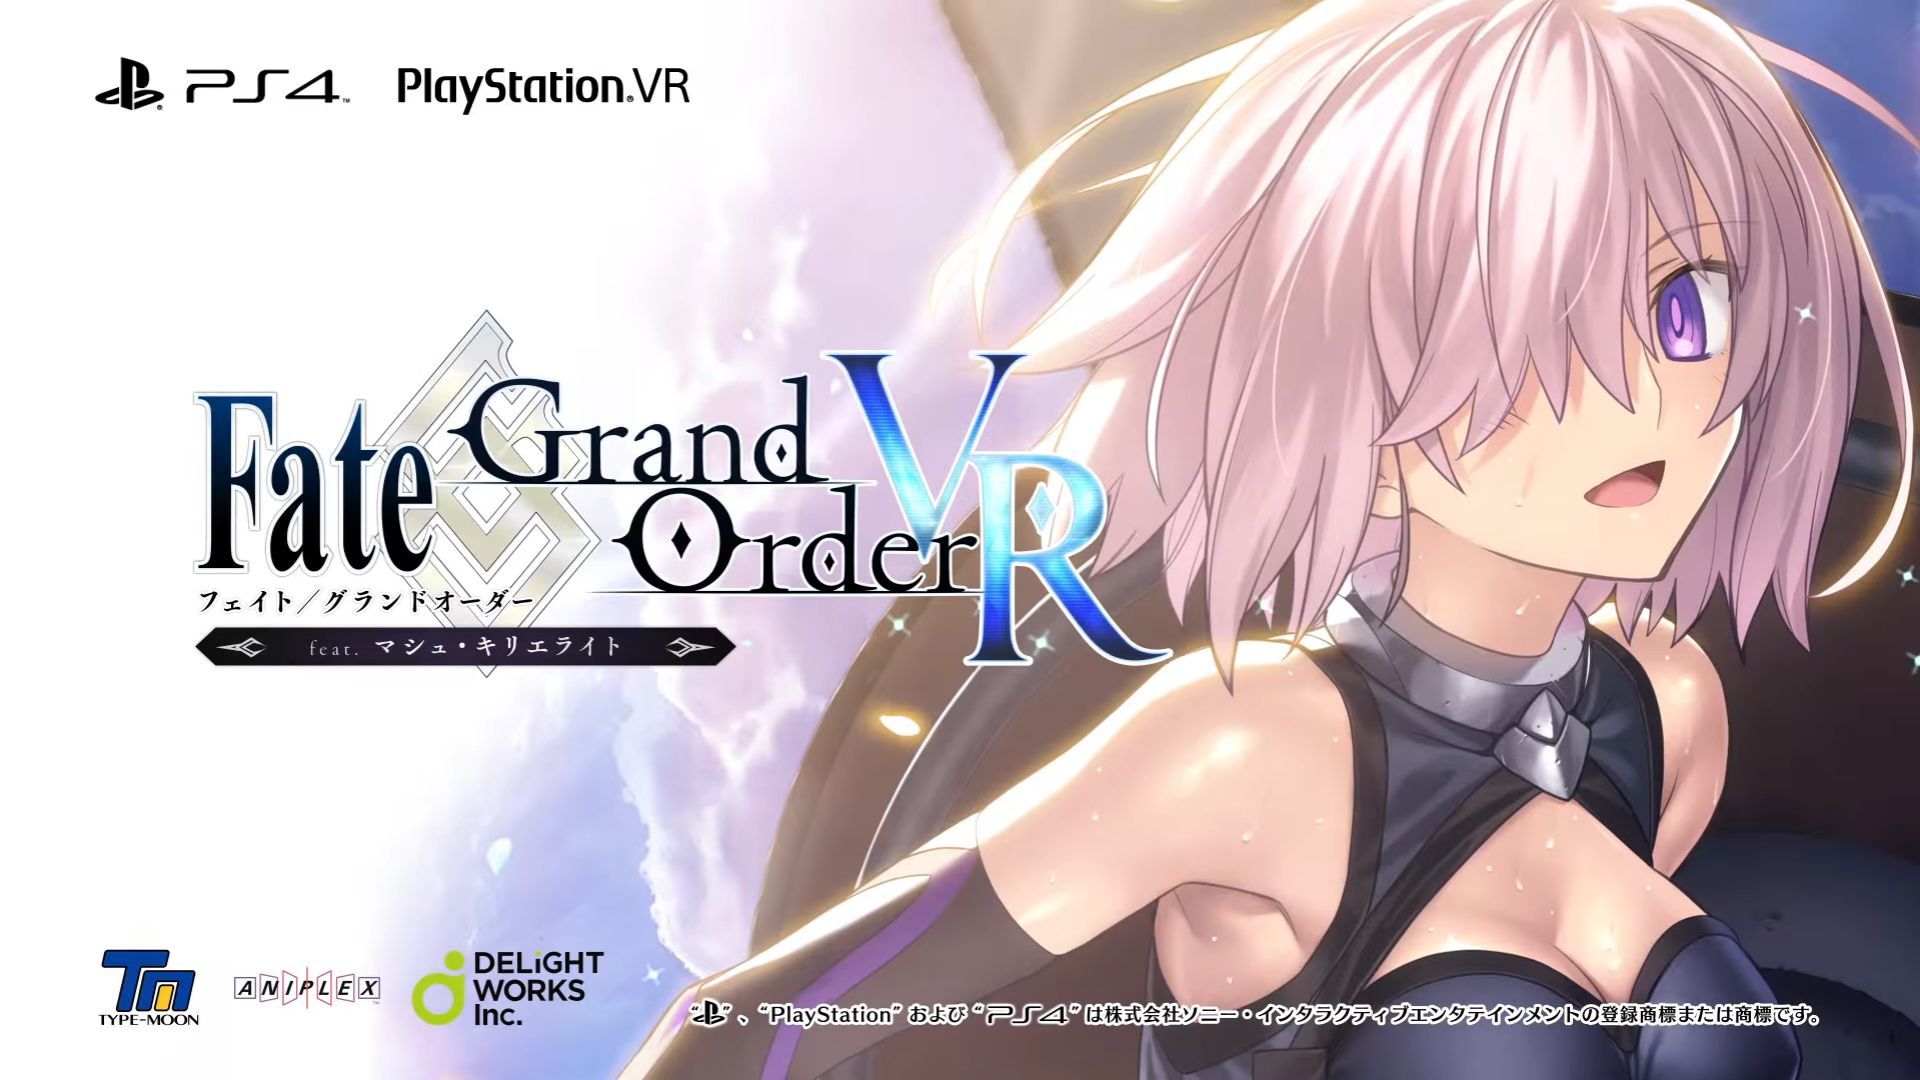 Fate/Grand Order VR Featuring Mashu Kyrielight